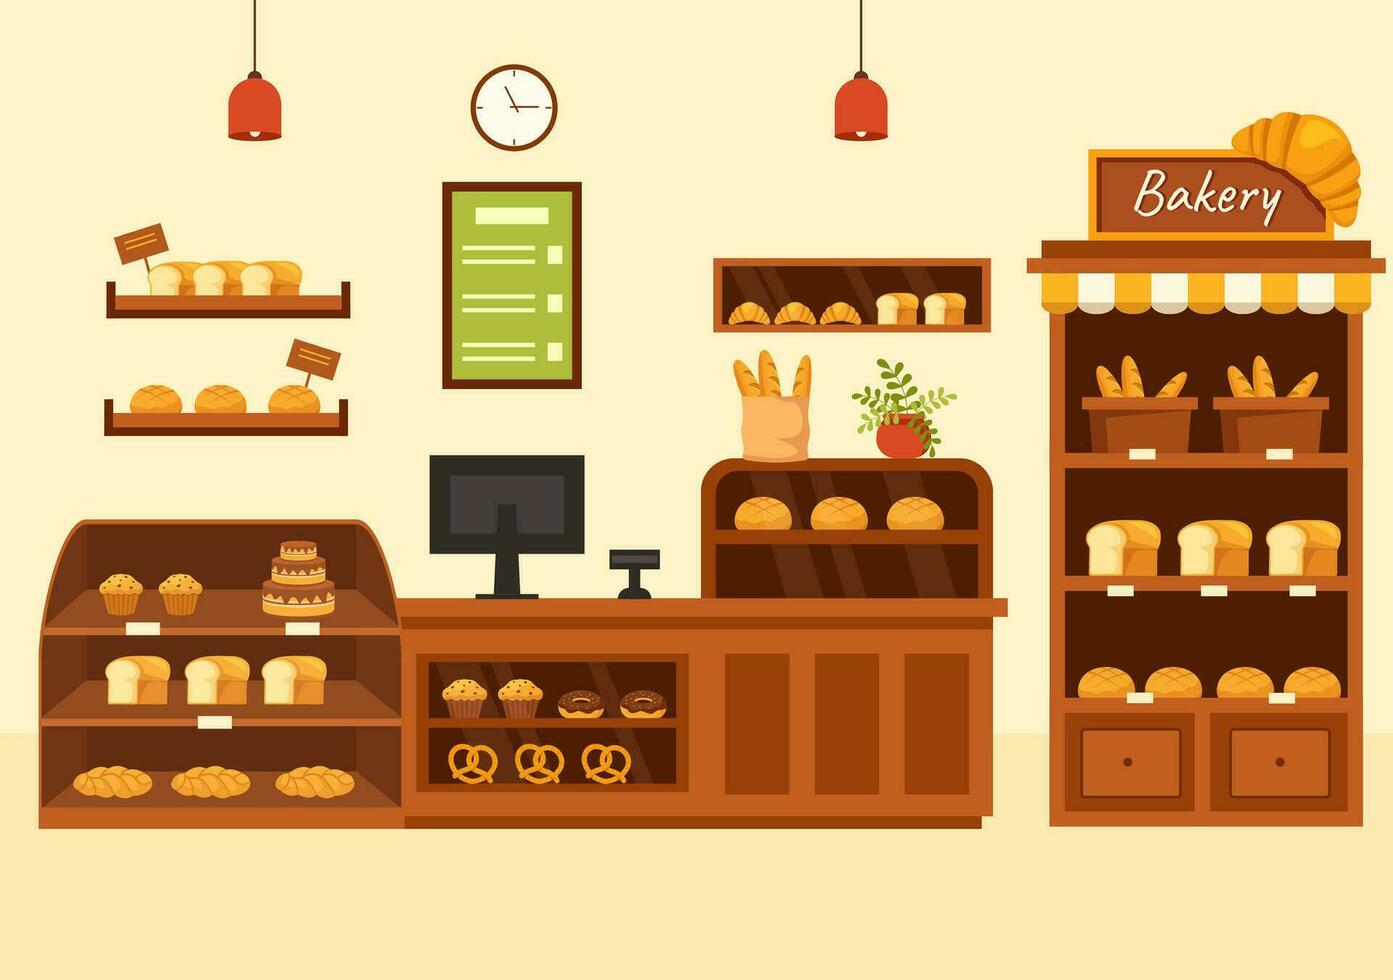 Bakery Store Vector Illustration with Various Types of Bread Products for Sale and Shop Interior in Flat Cartoon Background Design Template